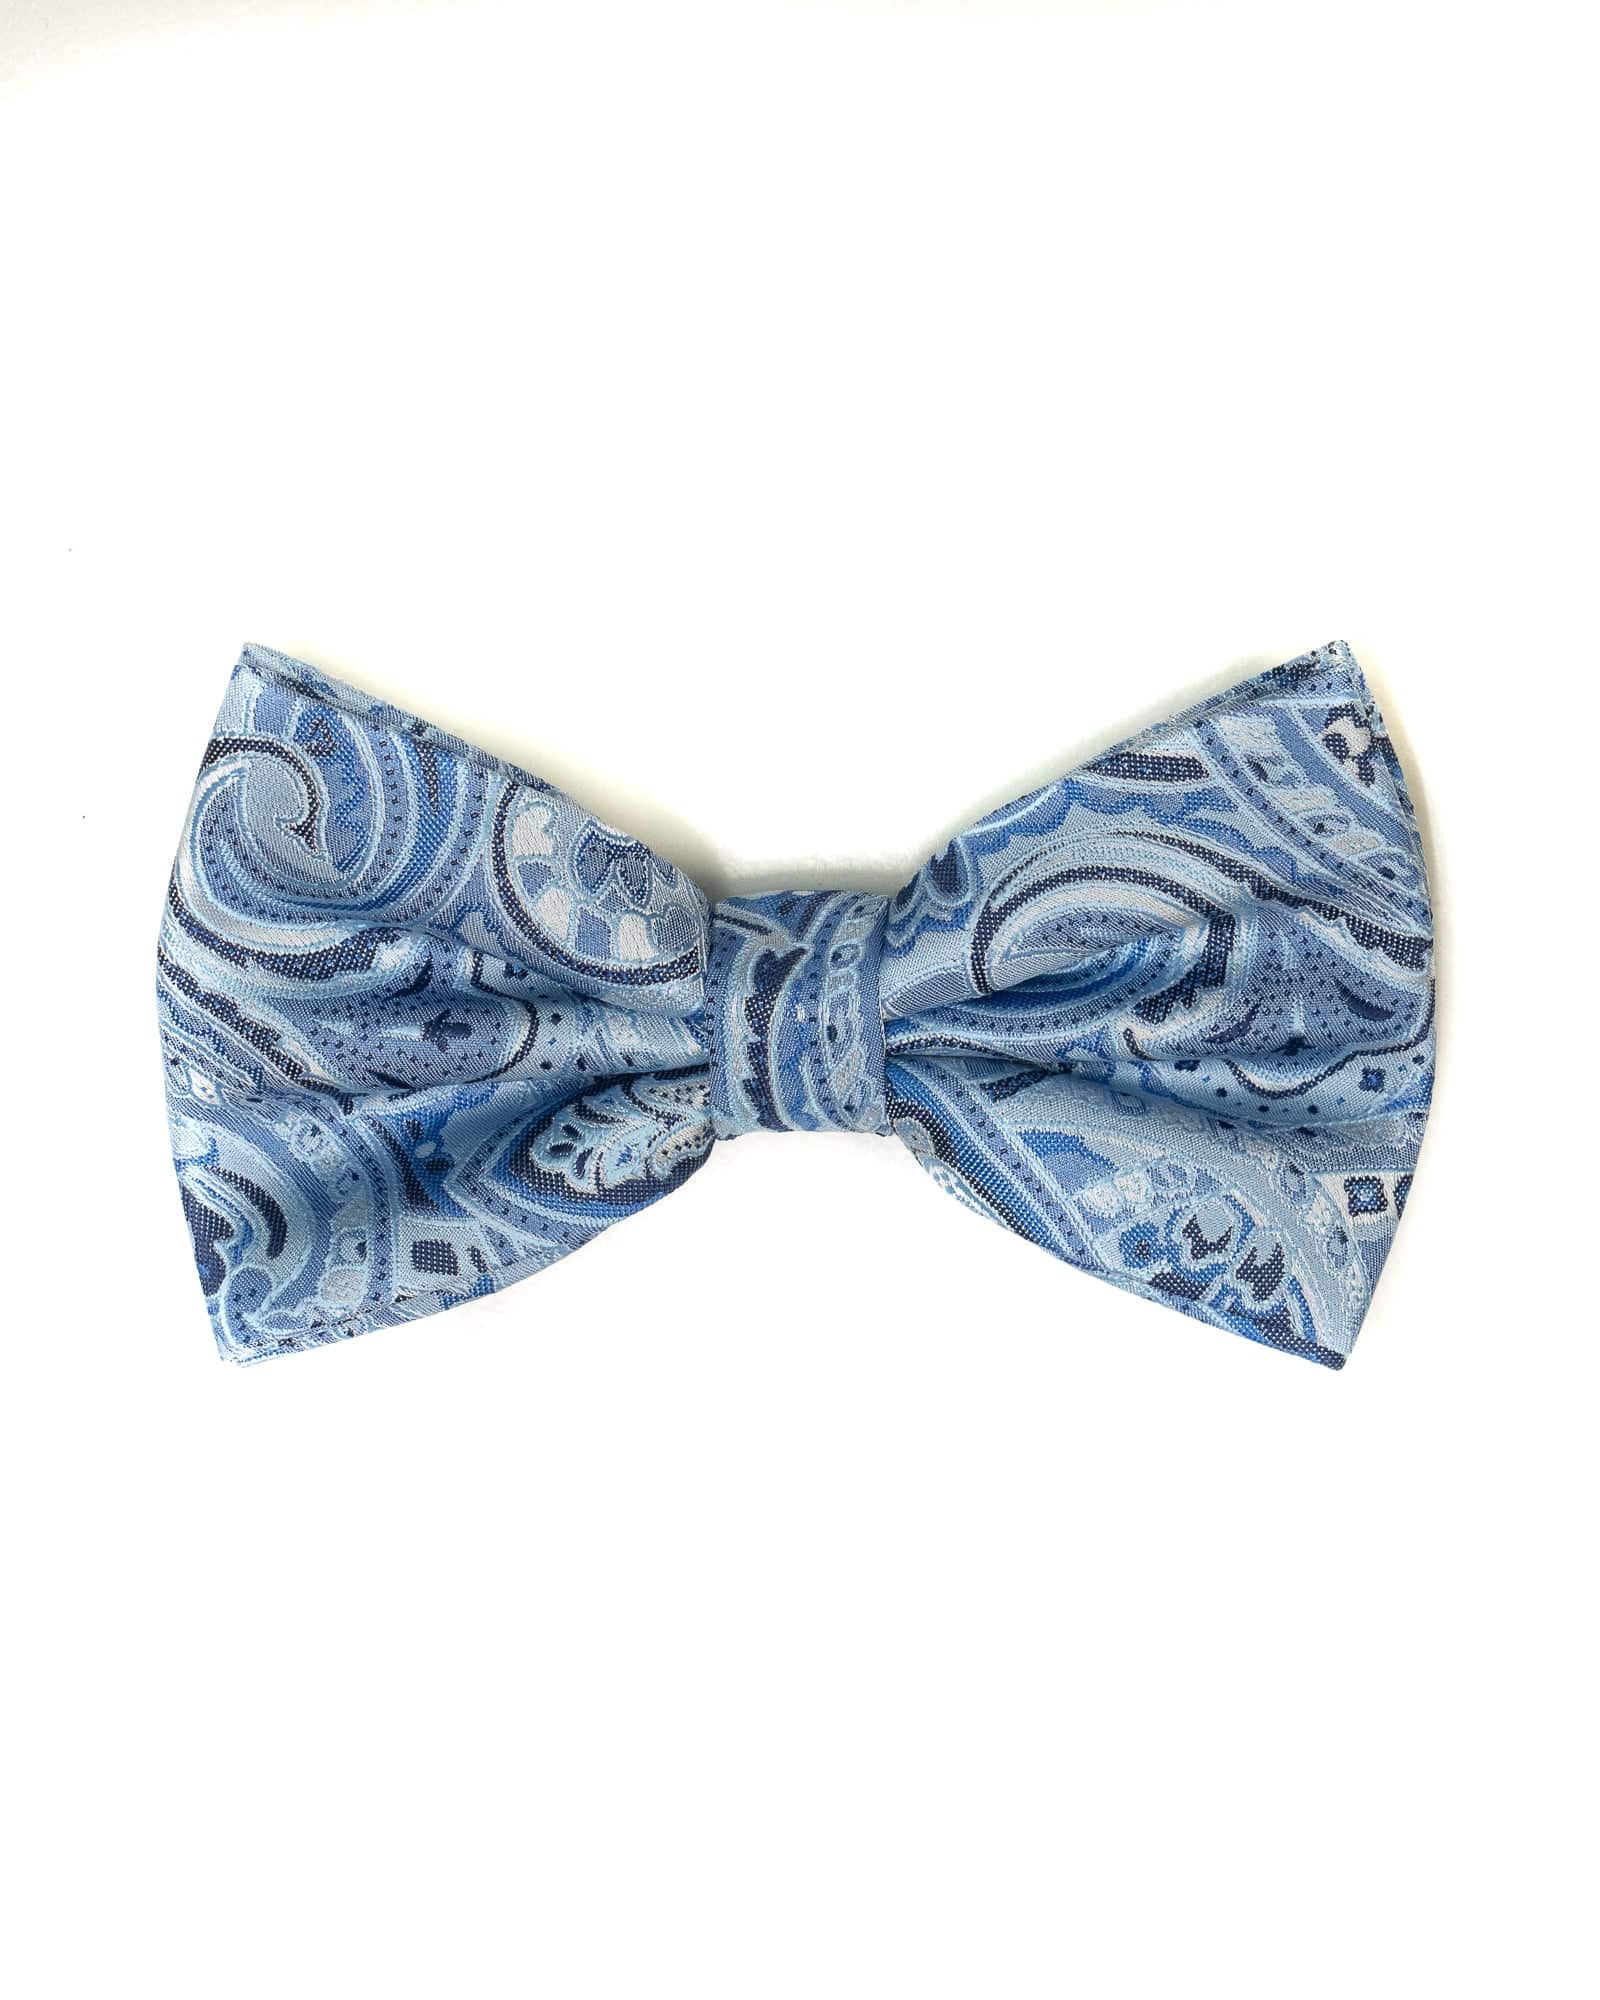 Bow Tie Paisley In Light Blue & Blue - Rainwater's Men's Clothing and Tuxedo Rental